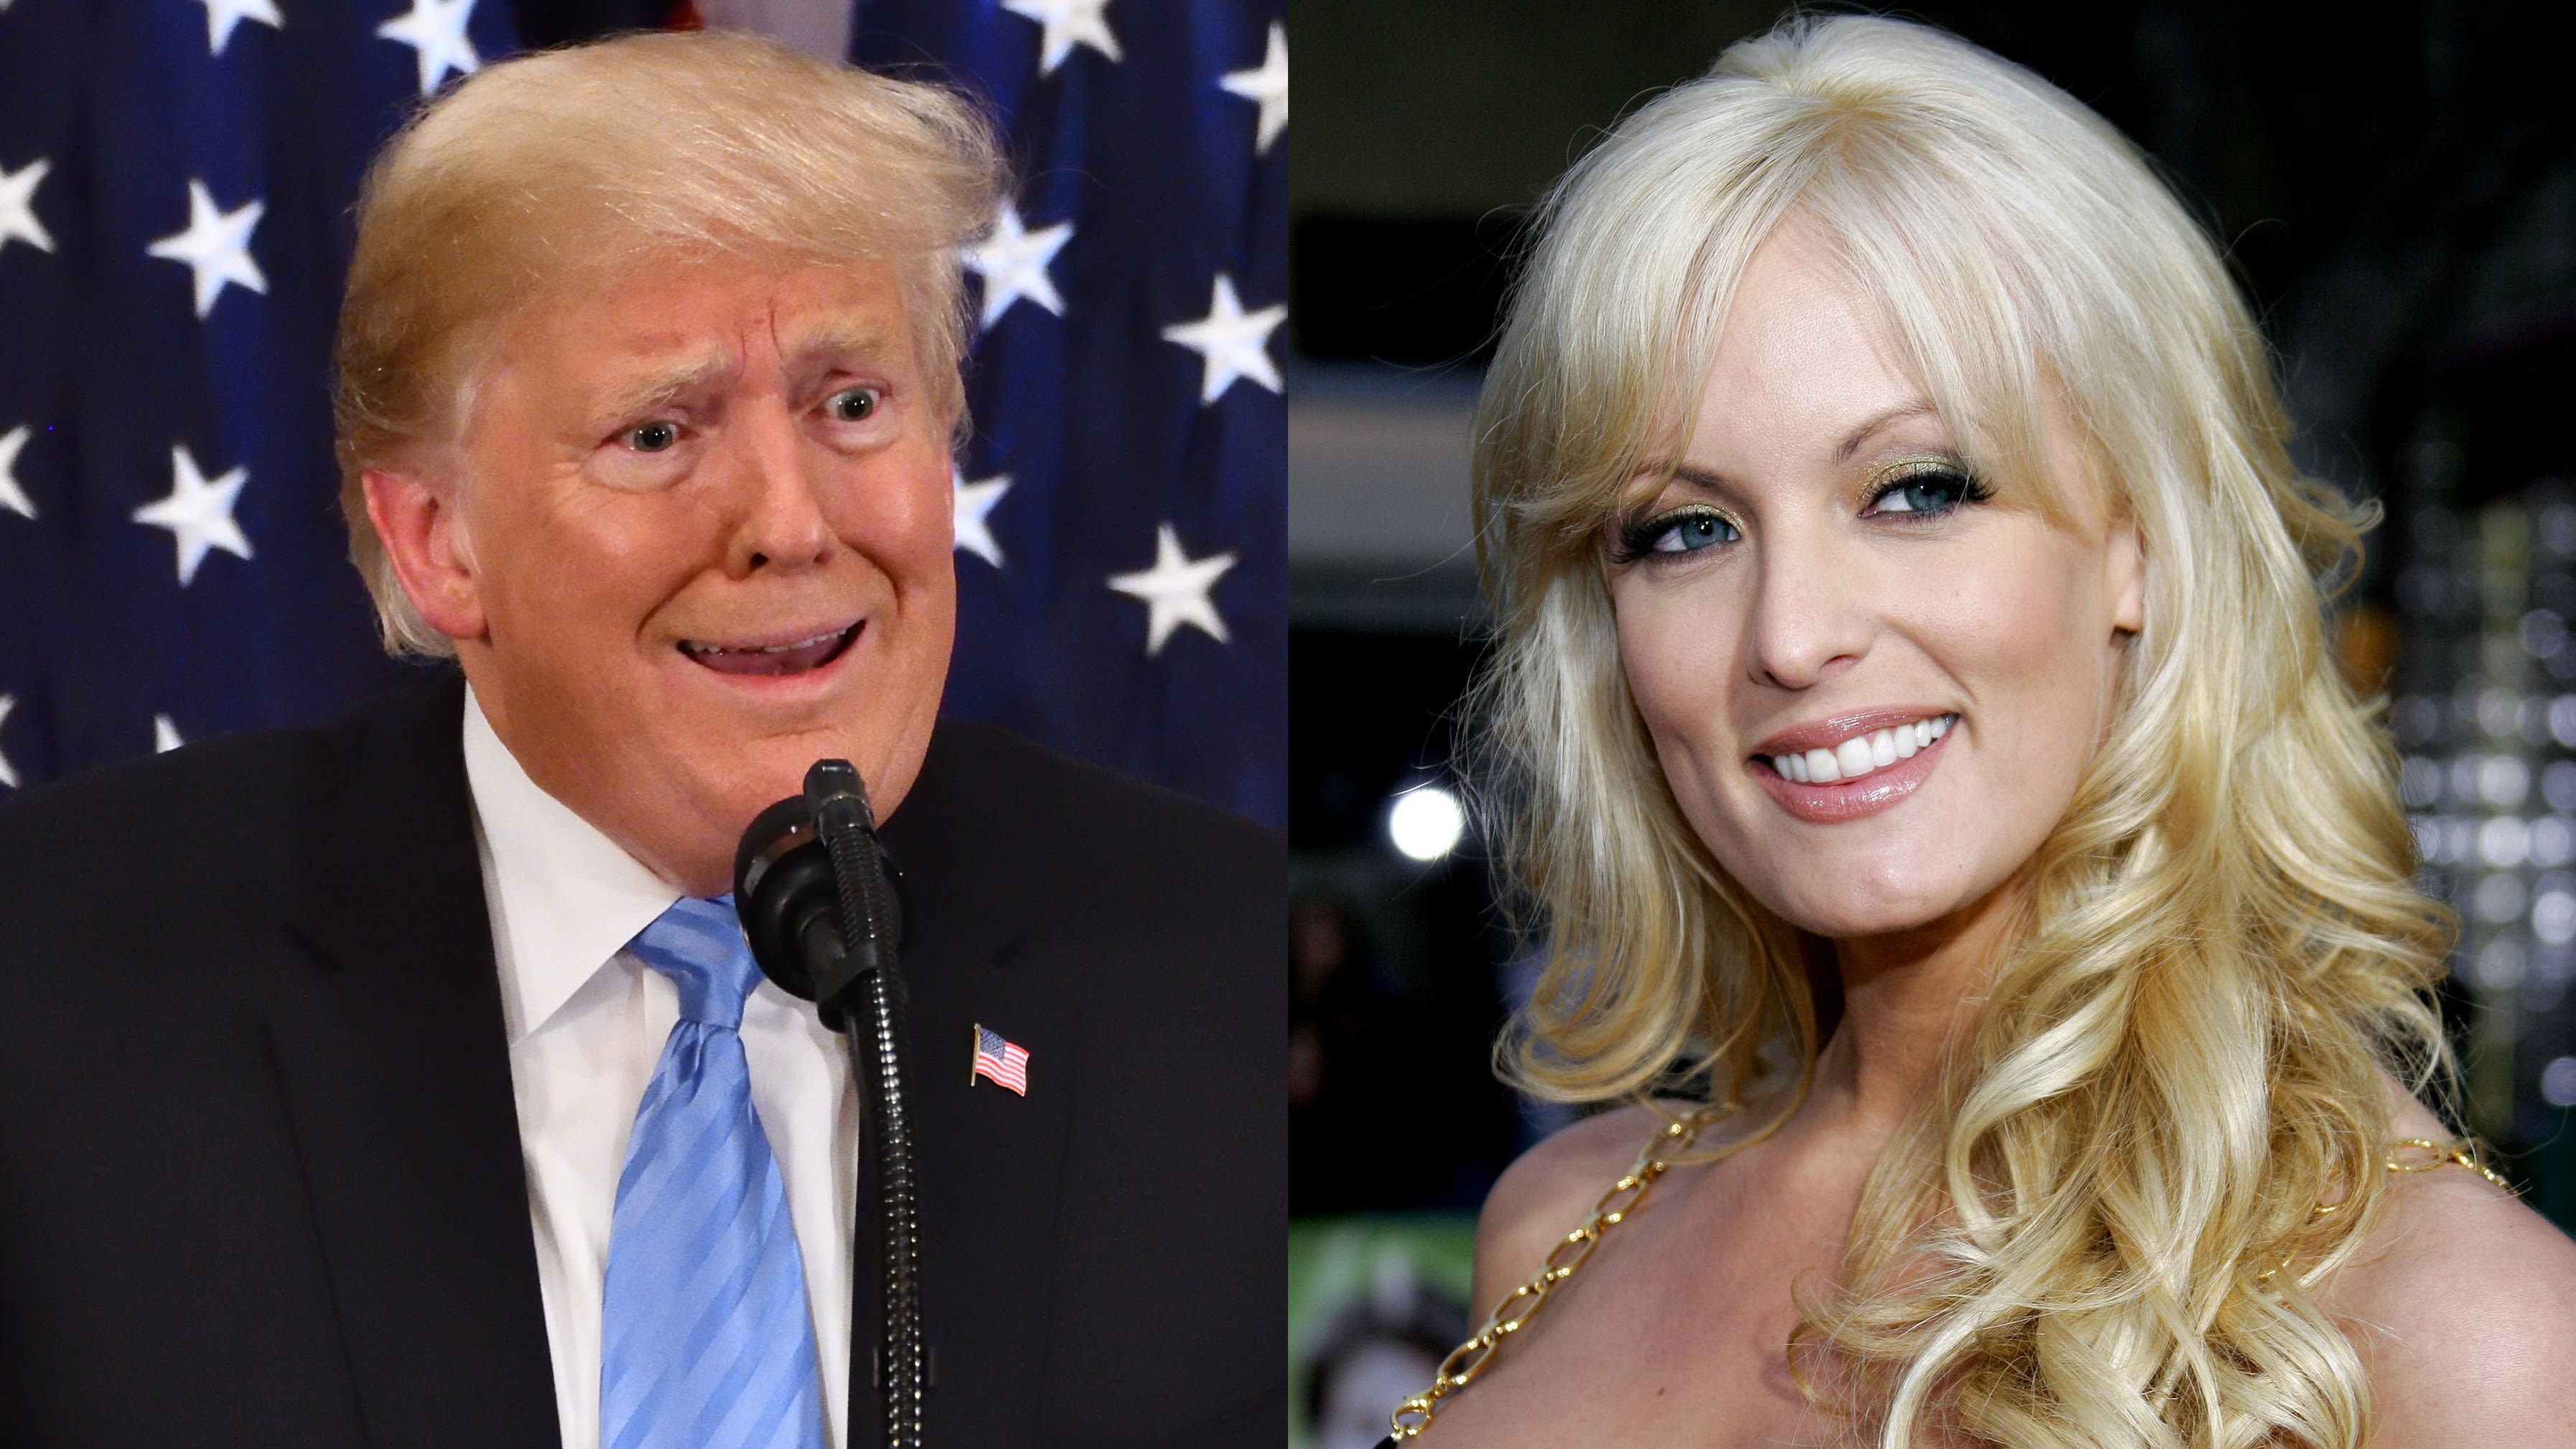 Top 5 times Stormy Daniels DESTROYED Trump during her testimony and made us CACKLE